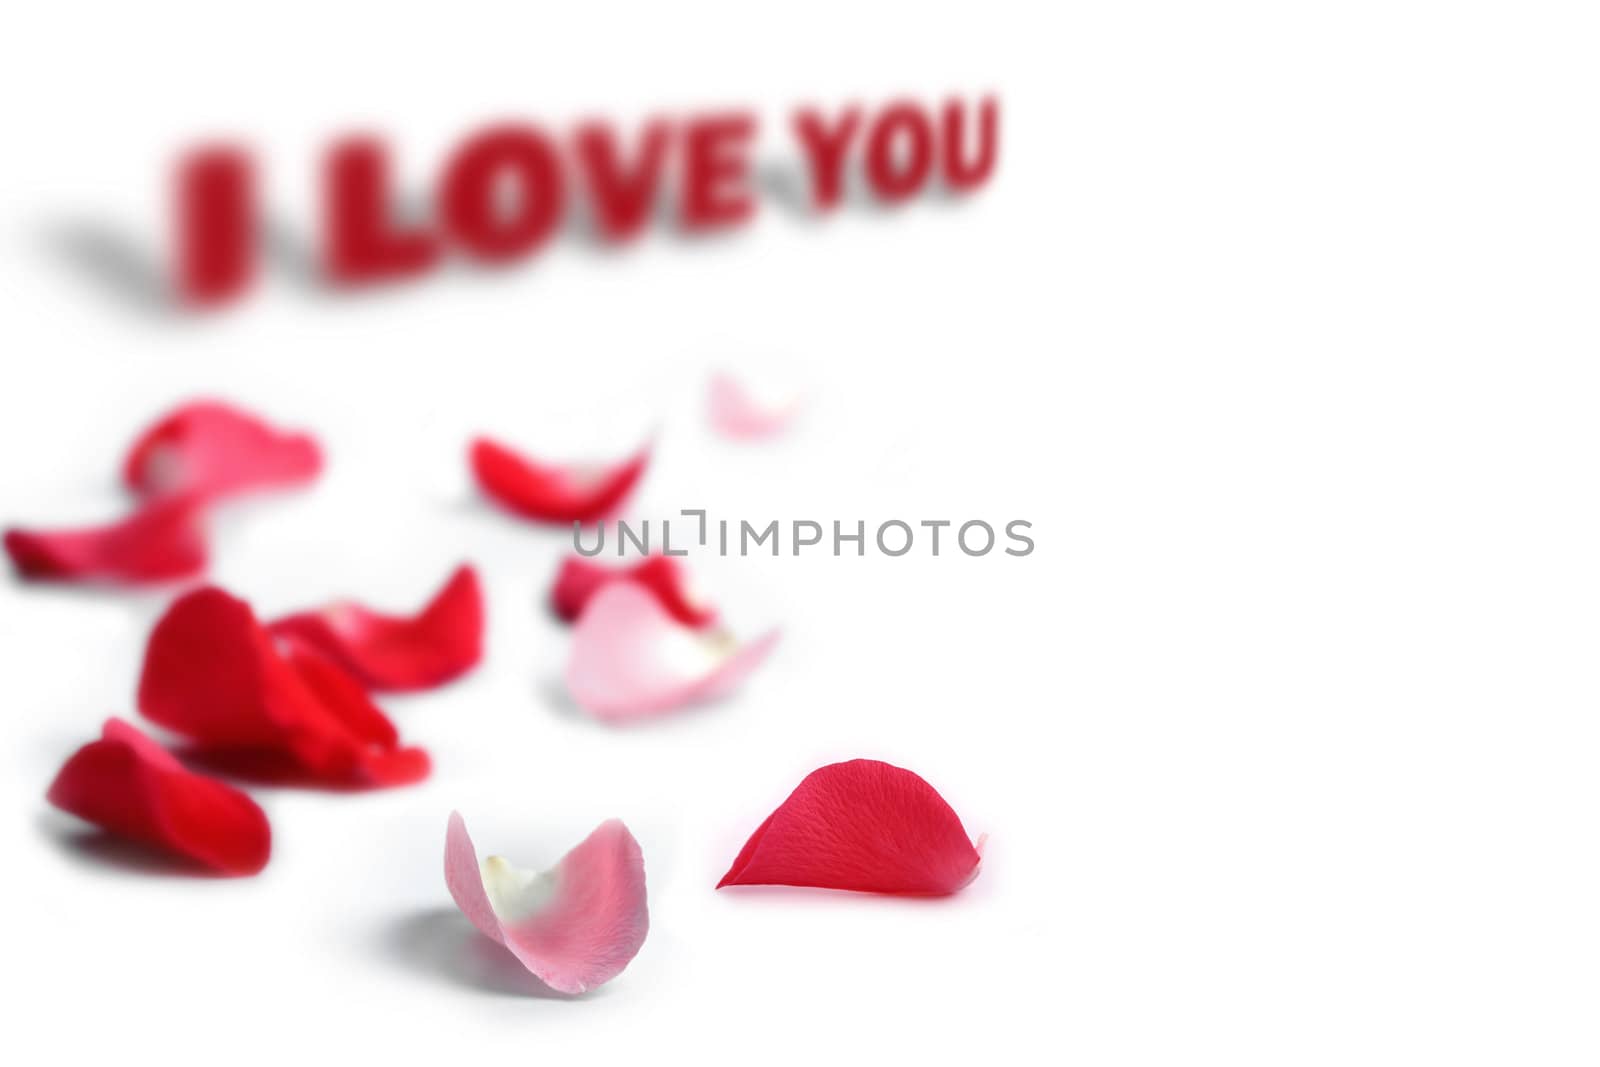 Rose petals with I love you phrase by mnsanthoshkumar